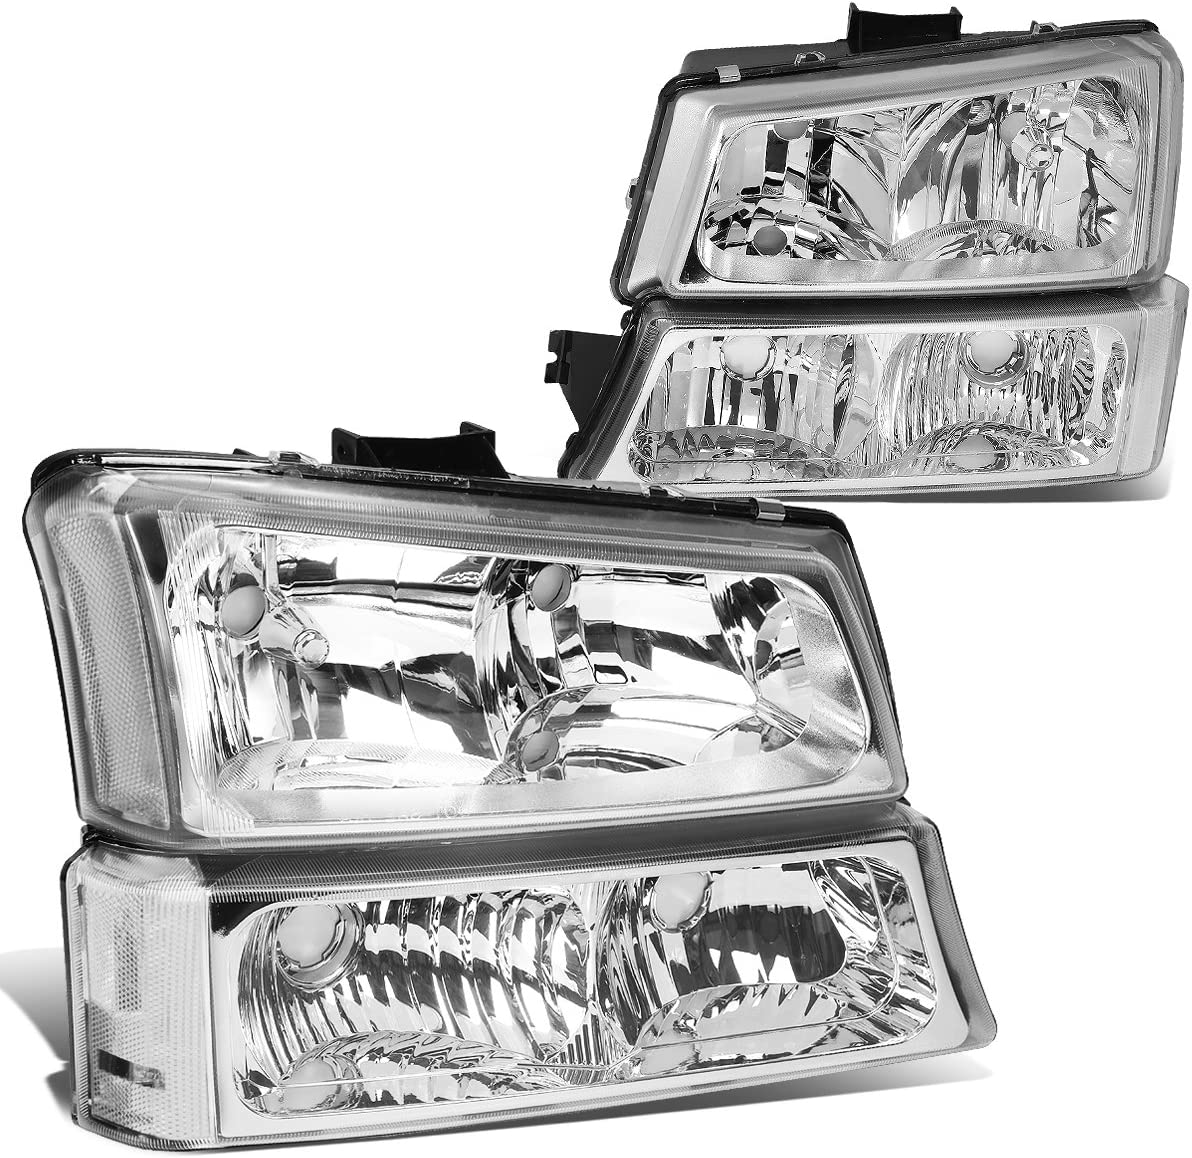 DNA Motoring HL-OH-CS03-4P-CH-CL1 Chrome Housing Headlights Compatible with  2003-2006 Chevy Silverado/Avalanche Fit Models without Factory Cladding